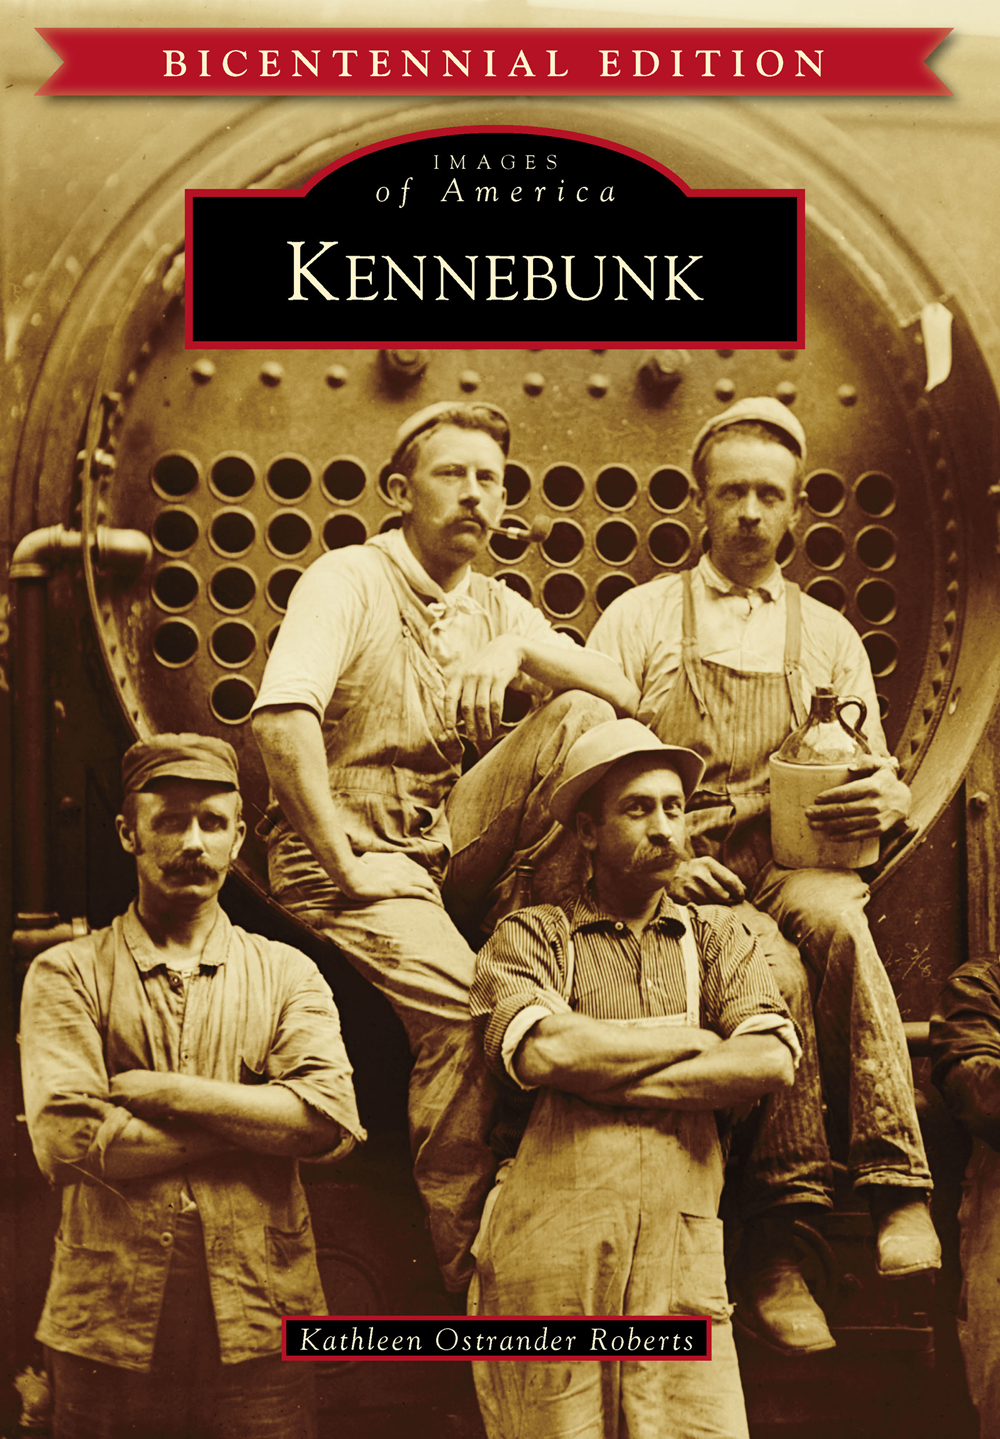 This image is the cover for the book Kennebunk, Images of America